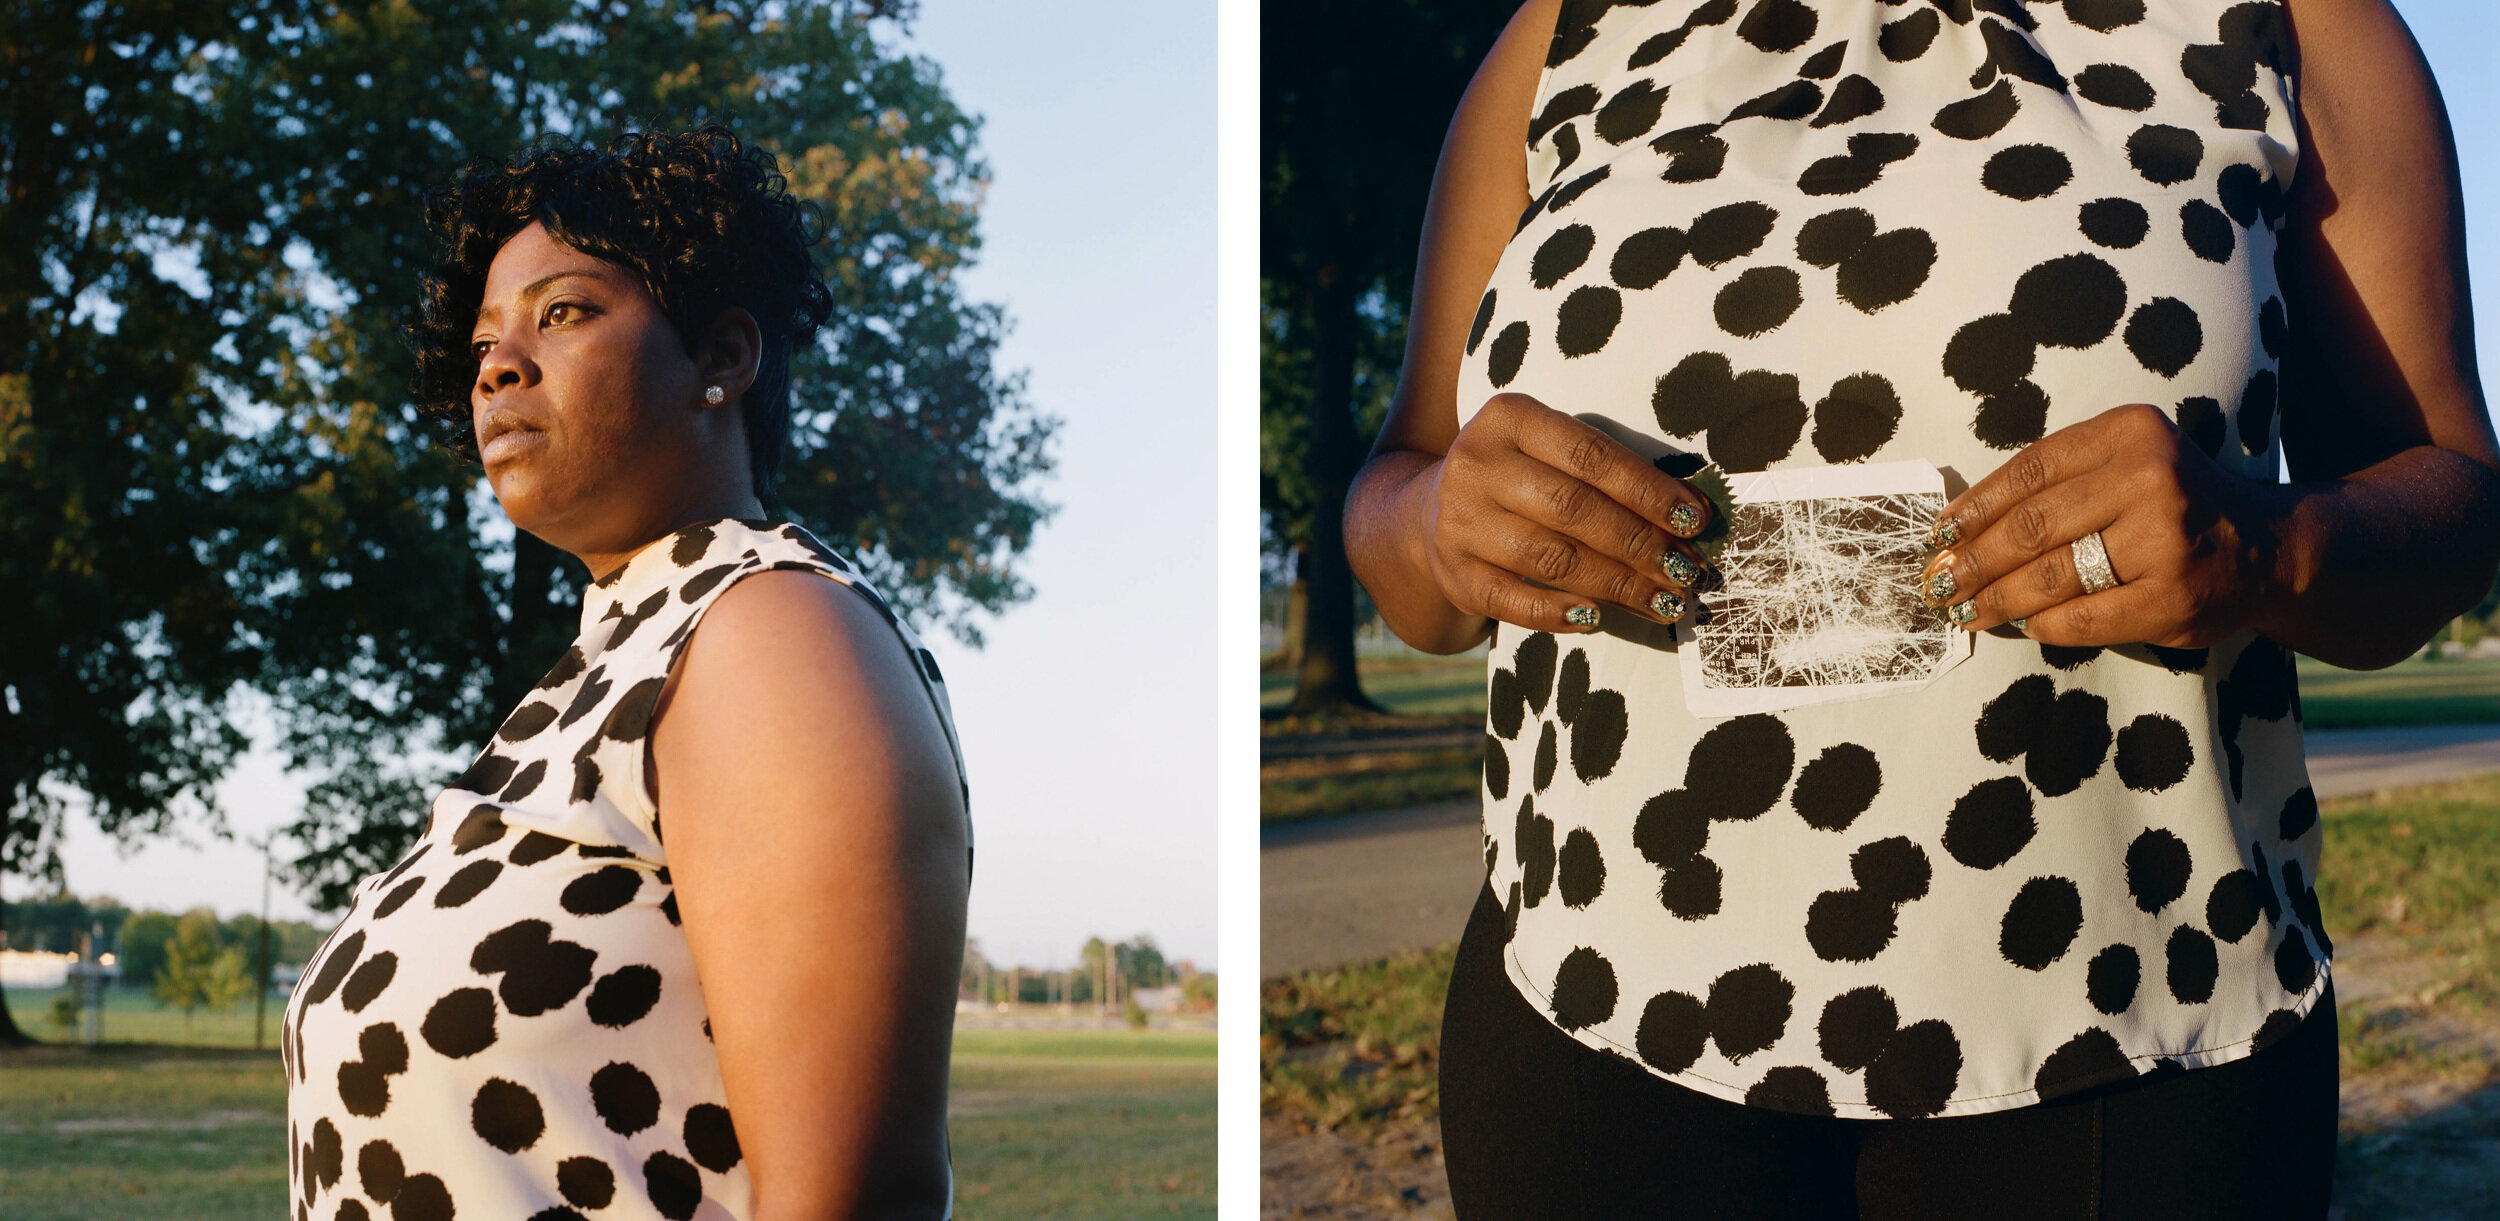   Miscarrying at Work: The Physical Toll of Pregnancy Discrimination   The New York Times 